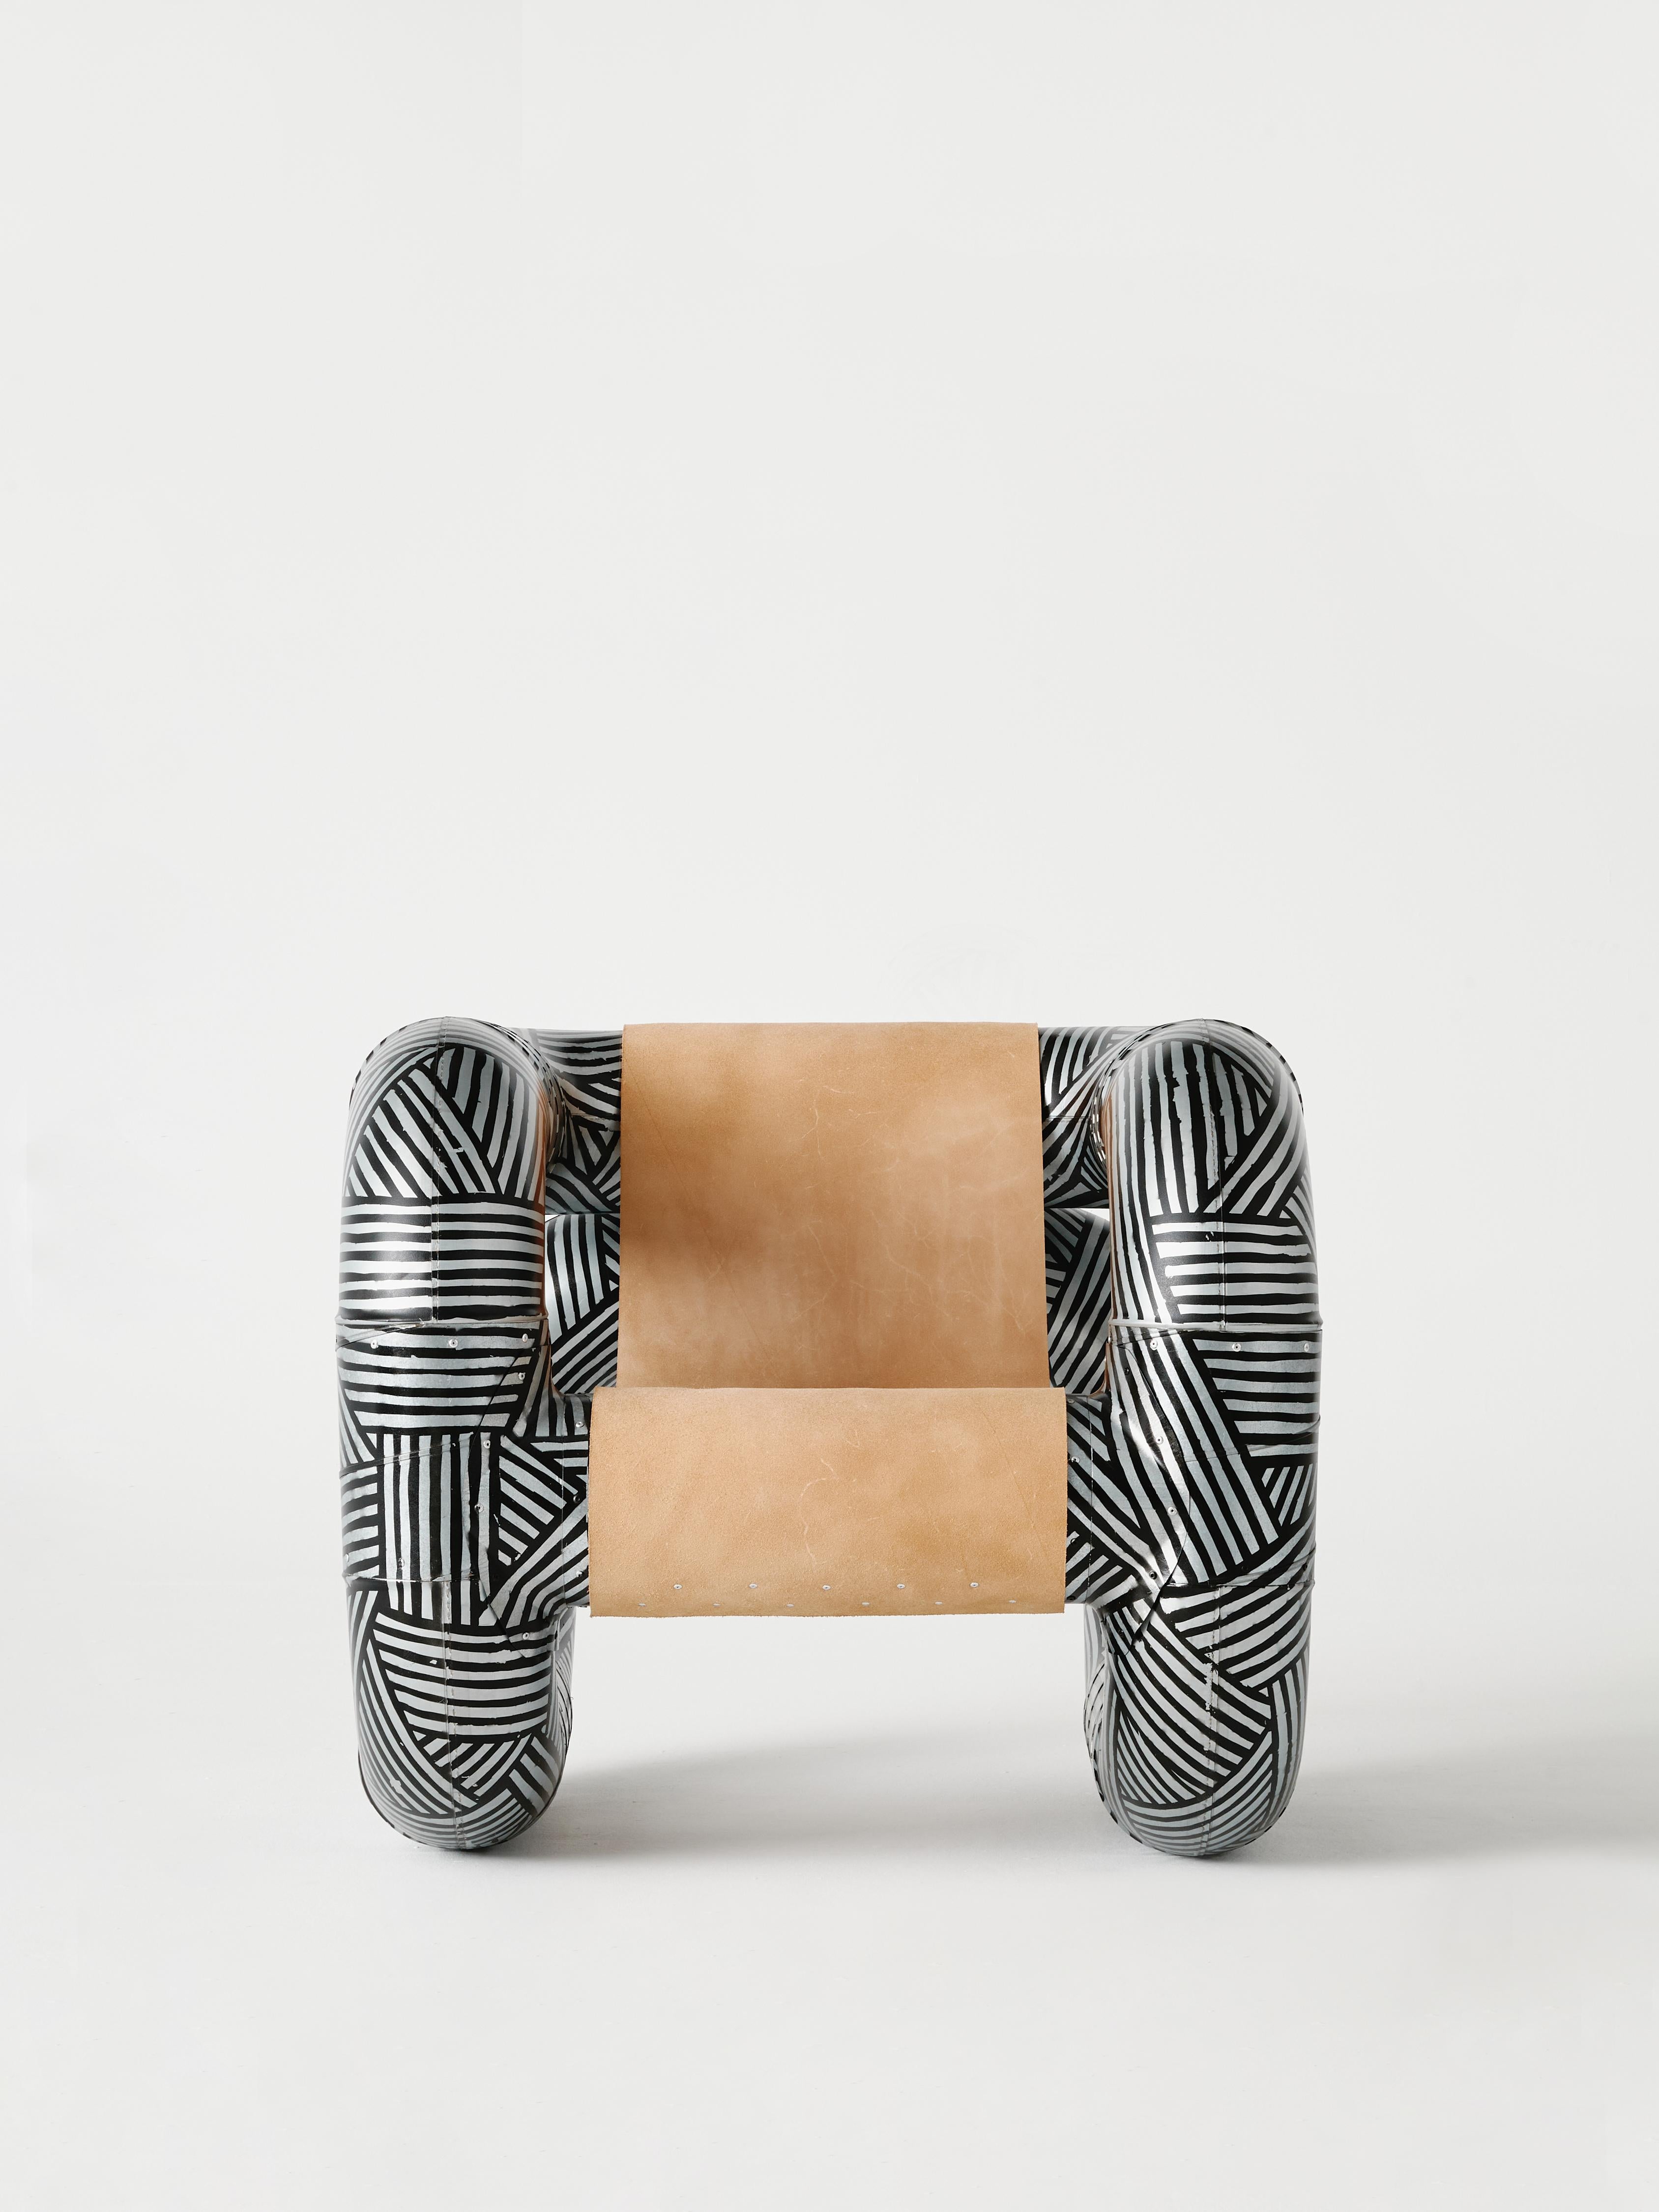 This Antigoon Tubular Steel Armchair forms part of the Series O.F.I.S (Objects From Intersticial Space), an ongoing research of industrial material's potential for narrative. Muñoz designed this Tubular Armchair as an exploration of the structural